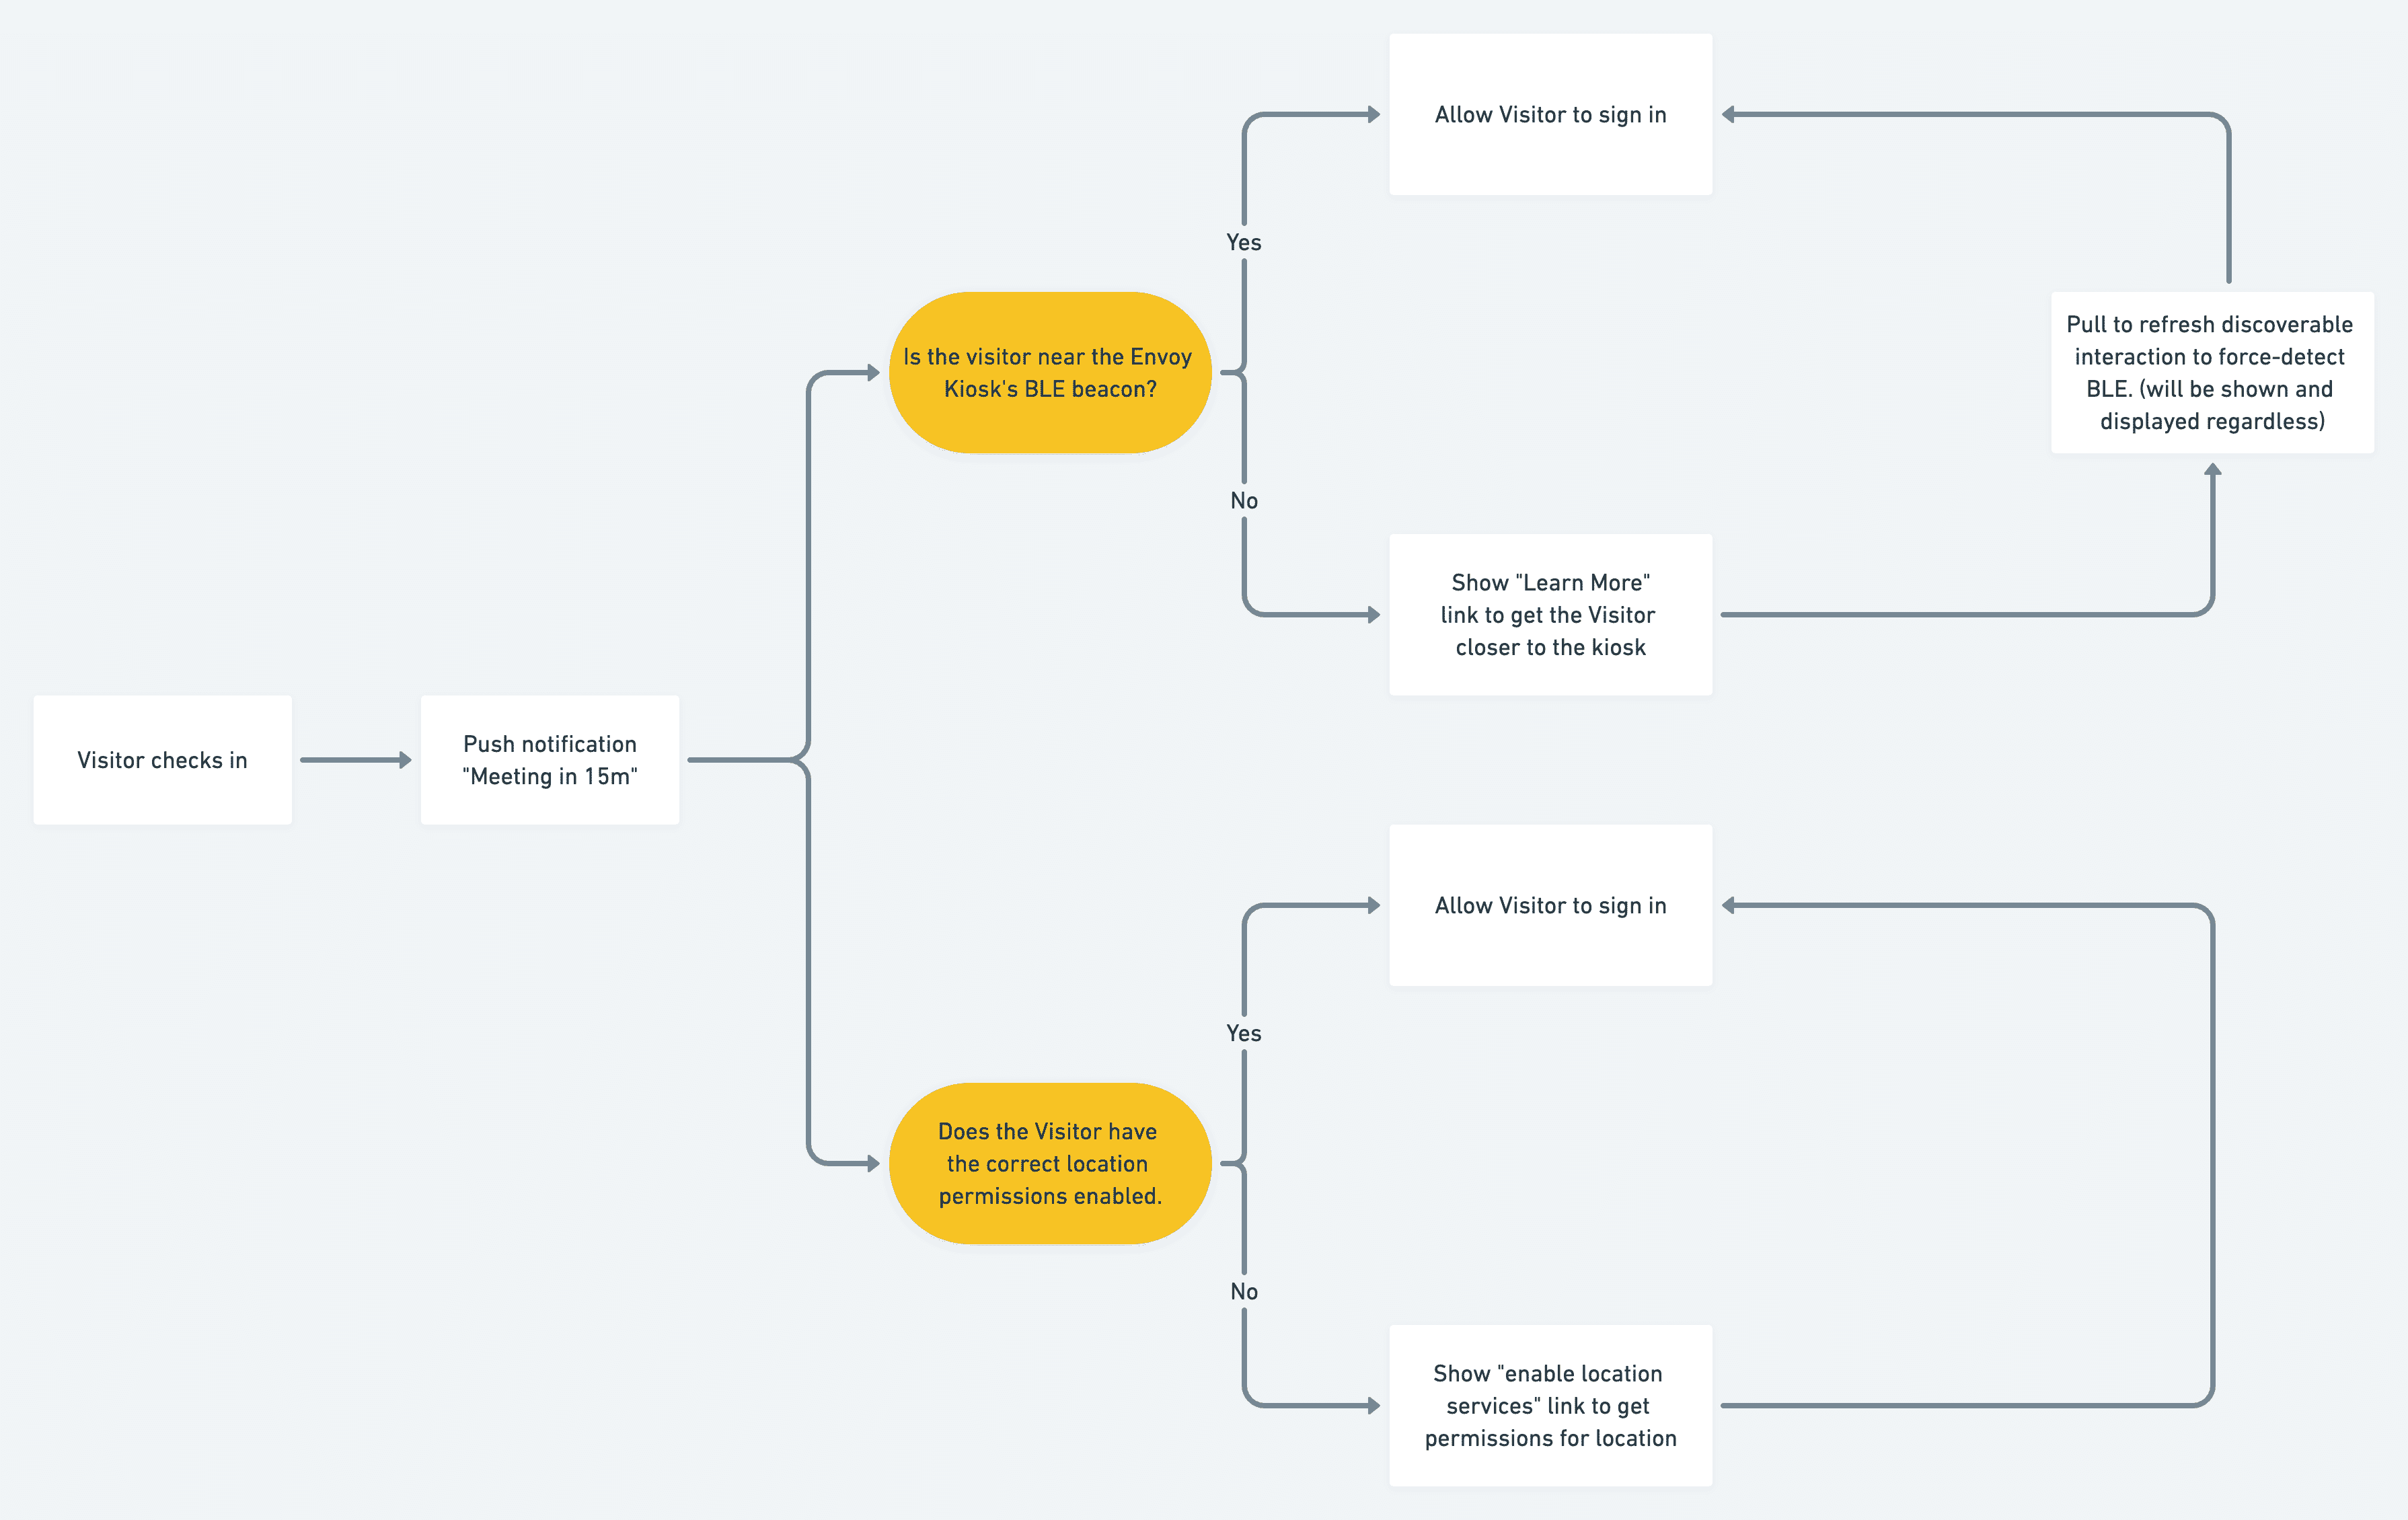 The workflow with edge cases